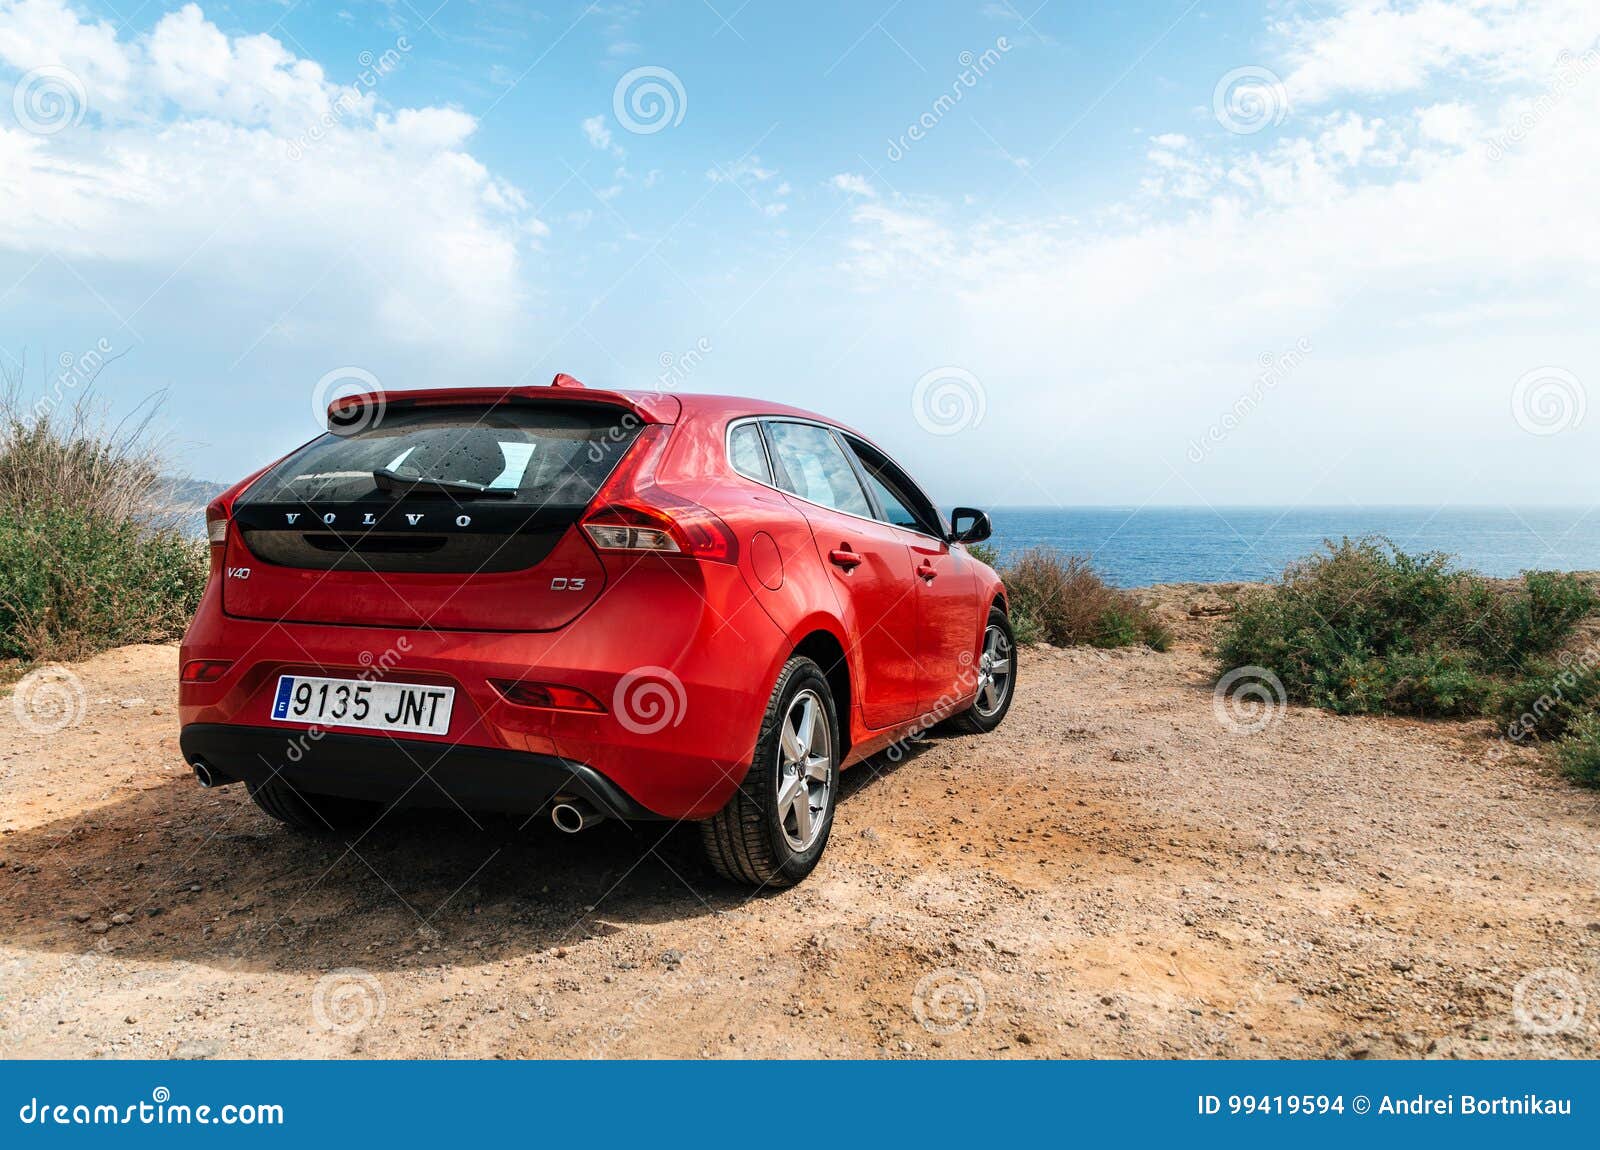 Examen album Parlament Bliv oppe Red Car Volvo V40 Standing on Edge of Cliff Against Sea. Editorial Stock  Image - Image of landscape, rural: 99419594